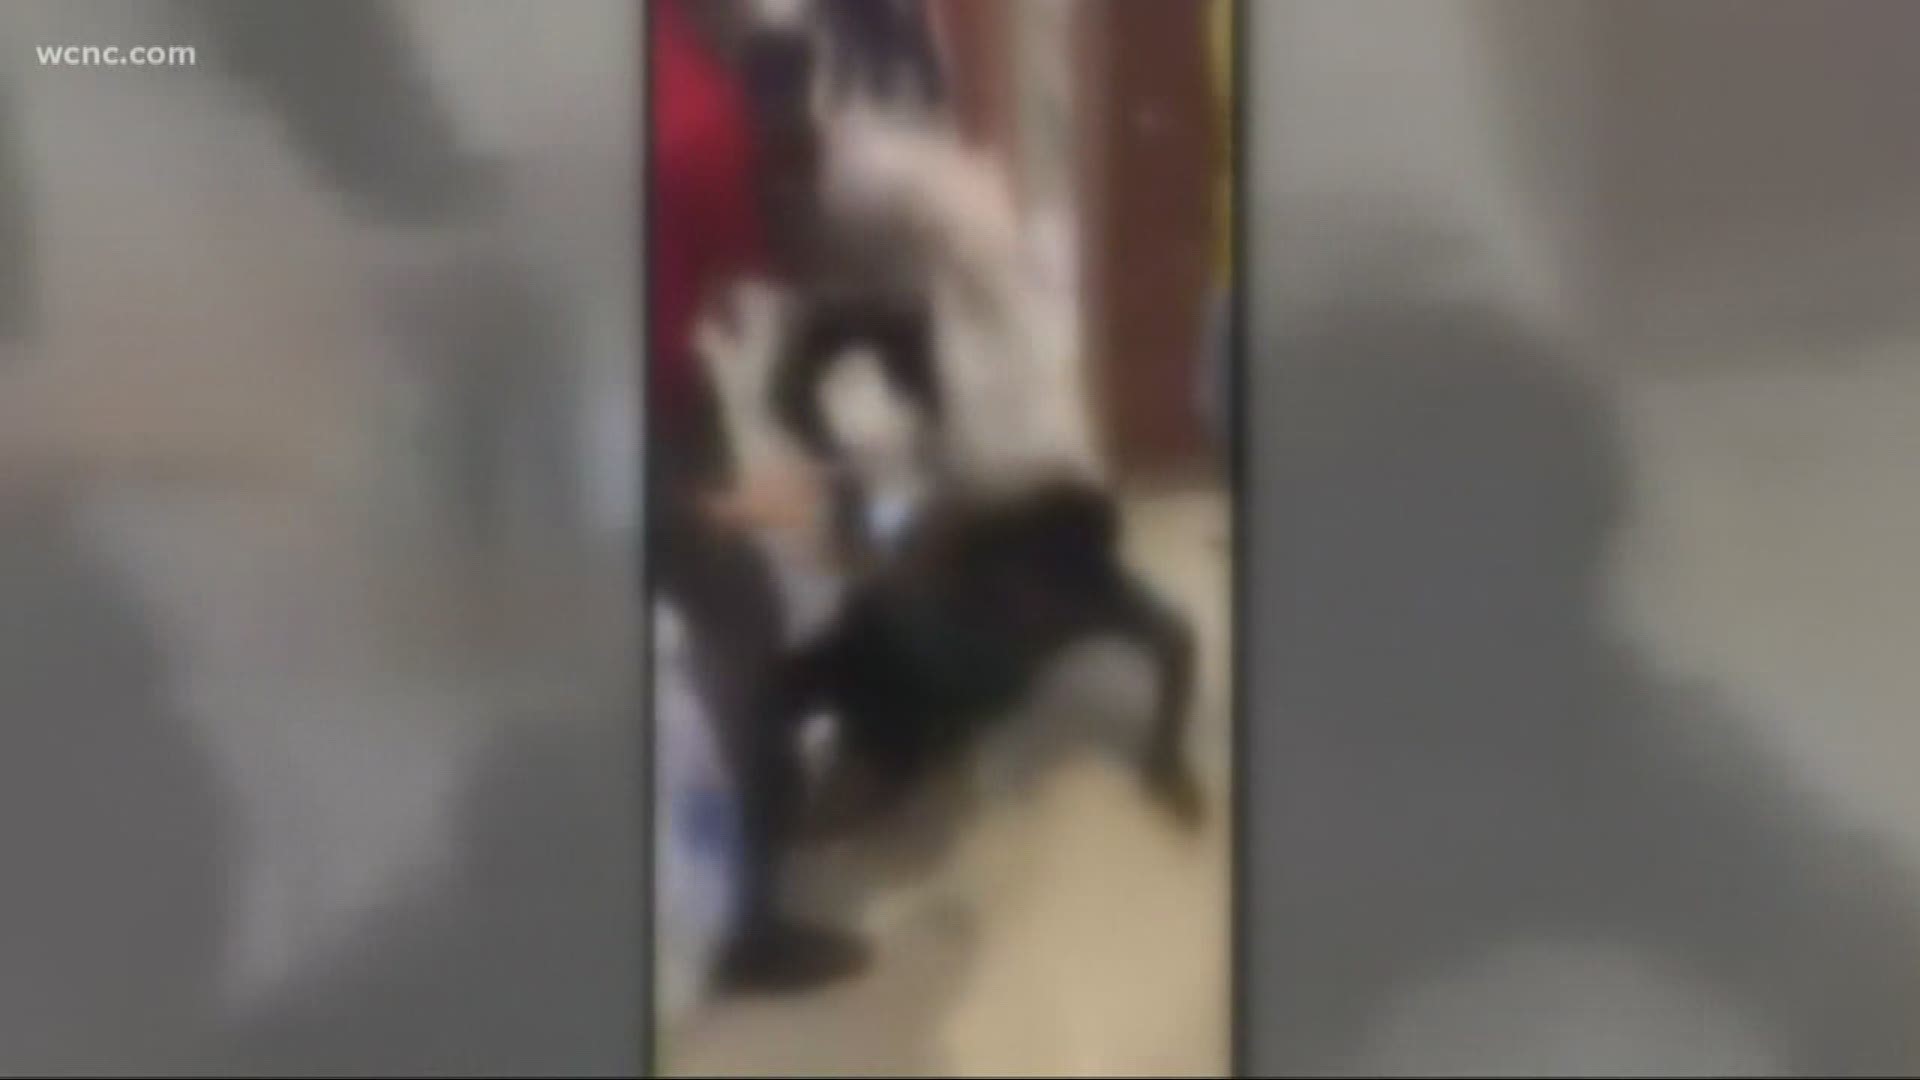 Eight students were removed from campus after a fight broke out at South Pointe High School Friday morning.